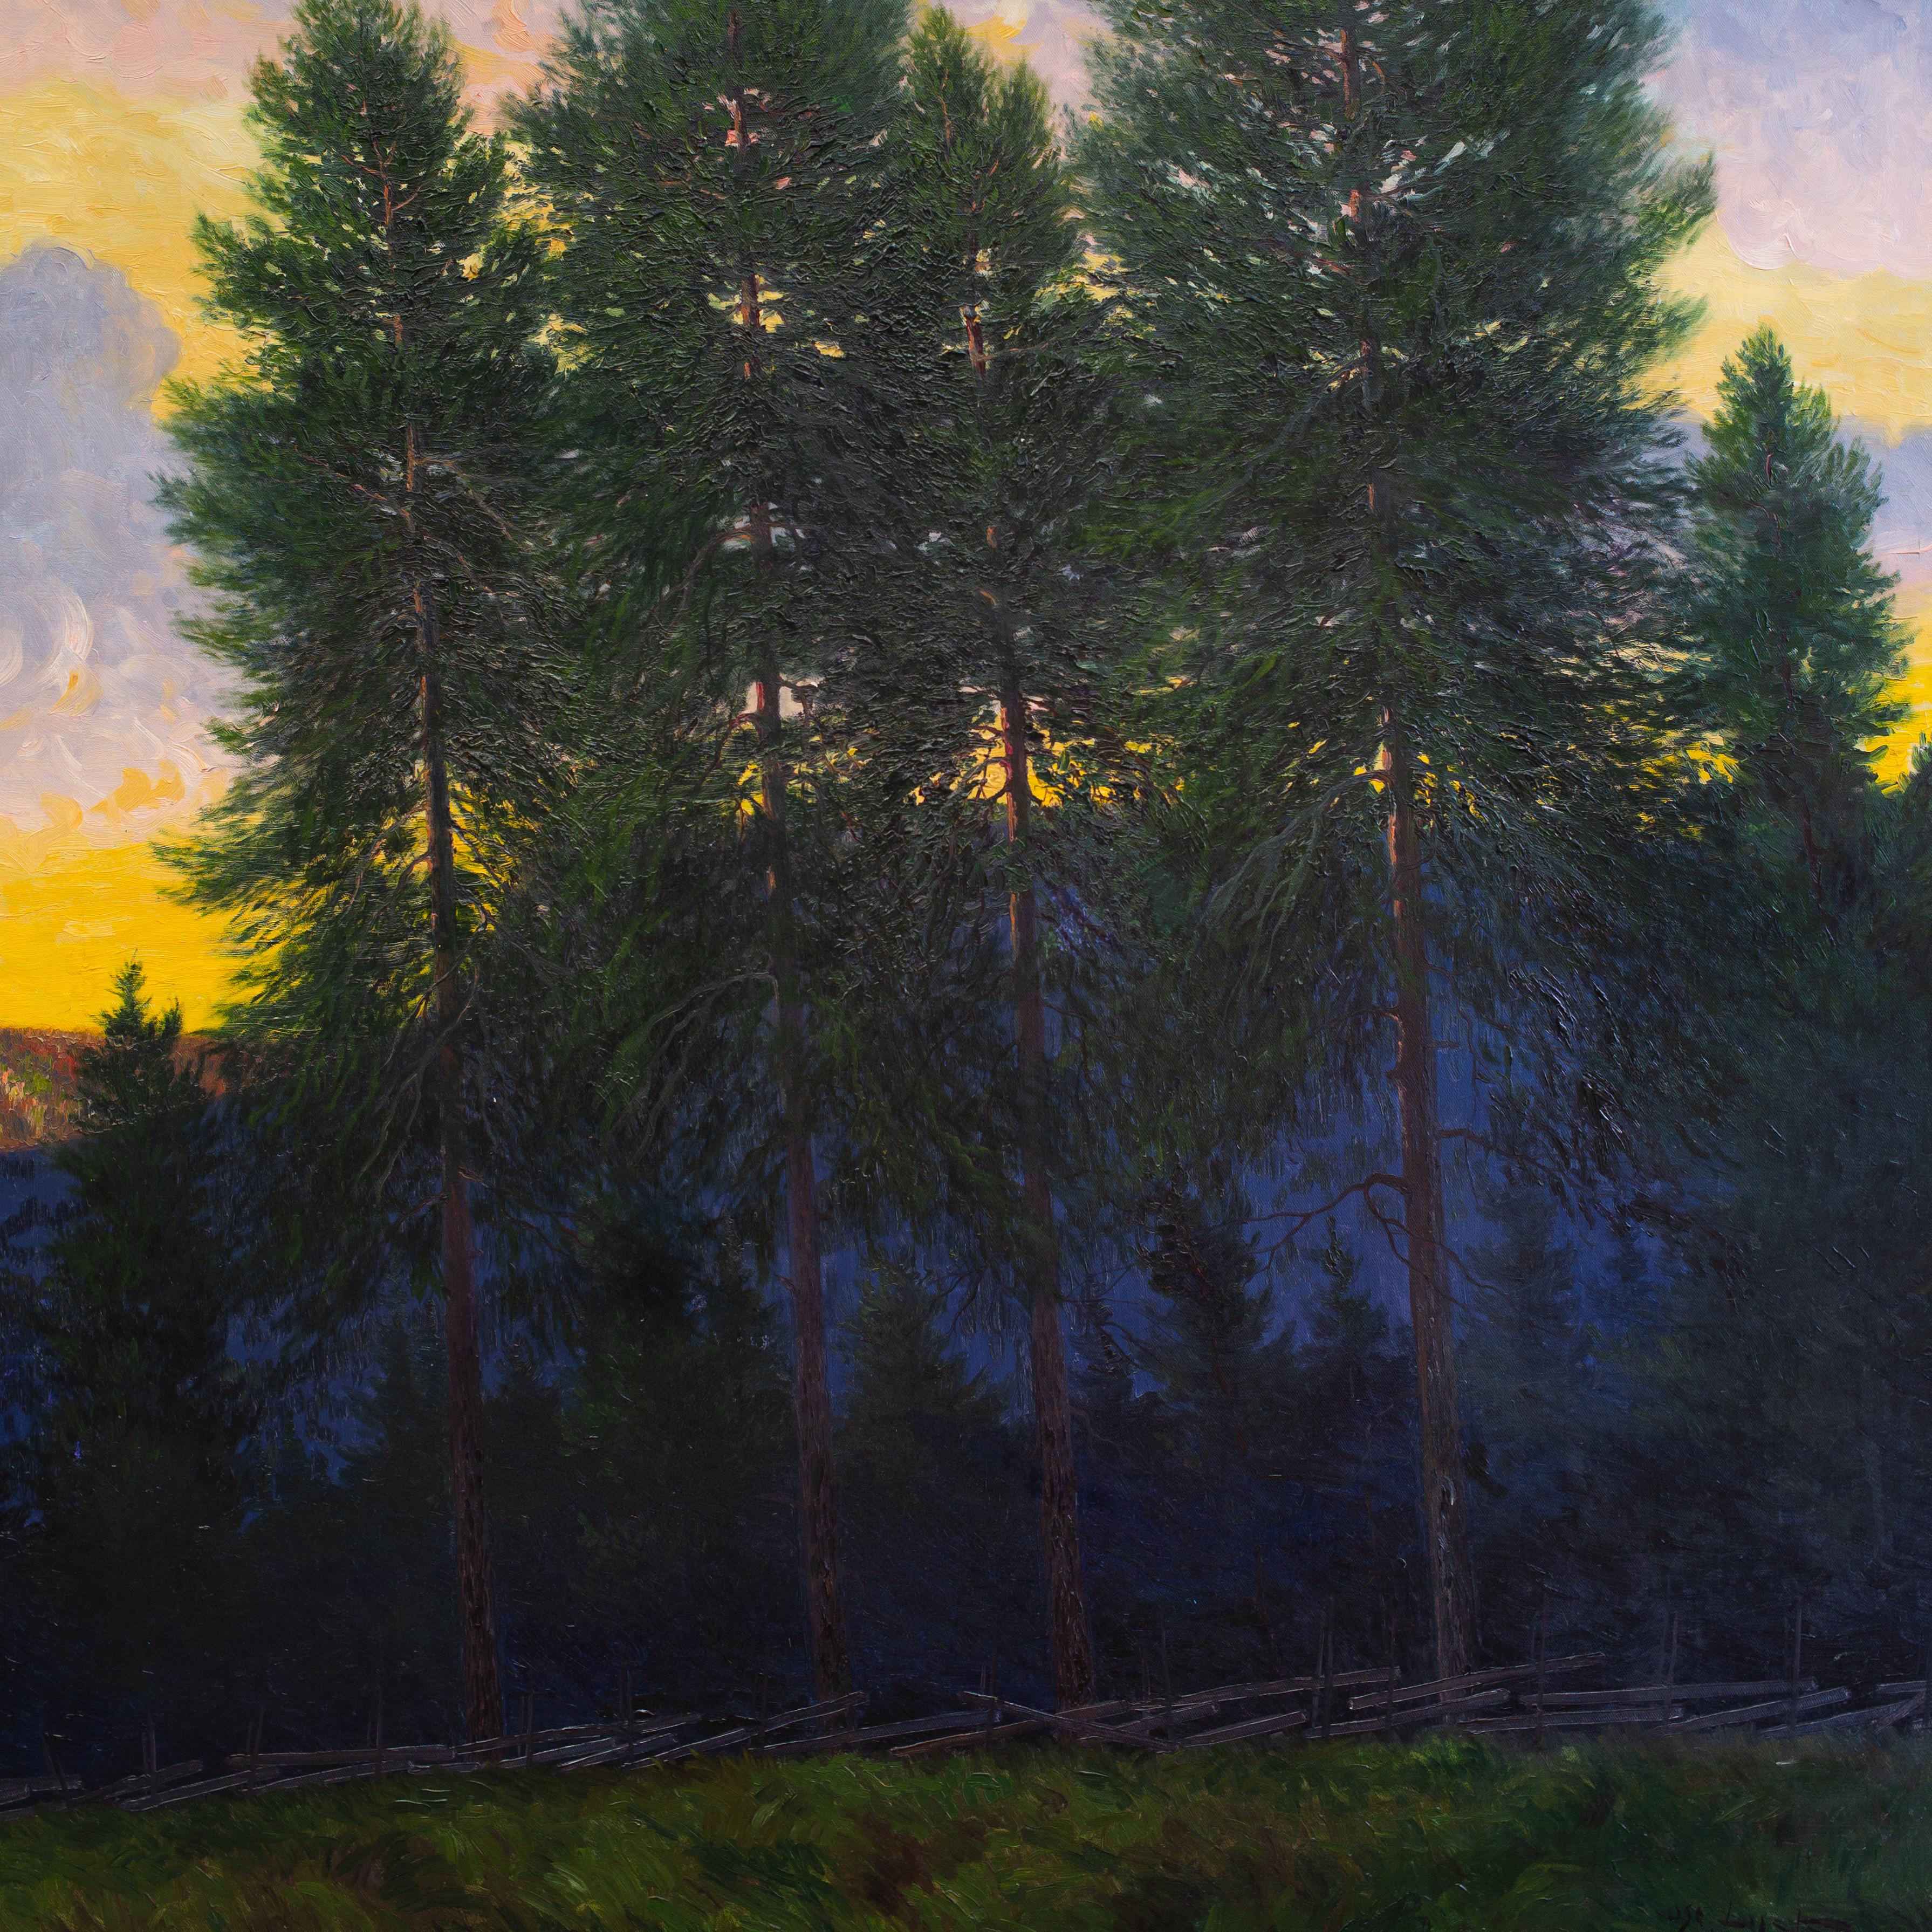 Oscar Lycke was a Swedish artist from Sundsvall.
He is best known for his impressive colourful landscape paintings in a national romantic and realism style. His motifs were often mountains, forests, rapids, and lakes painted with his self-taught